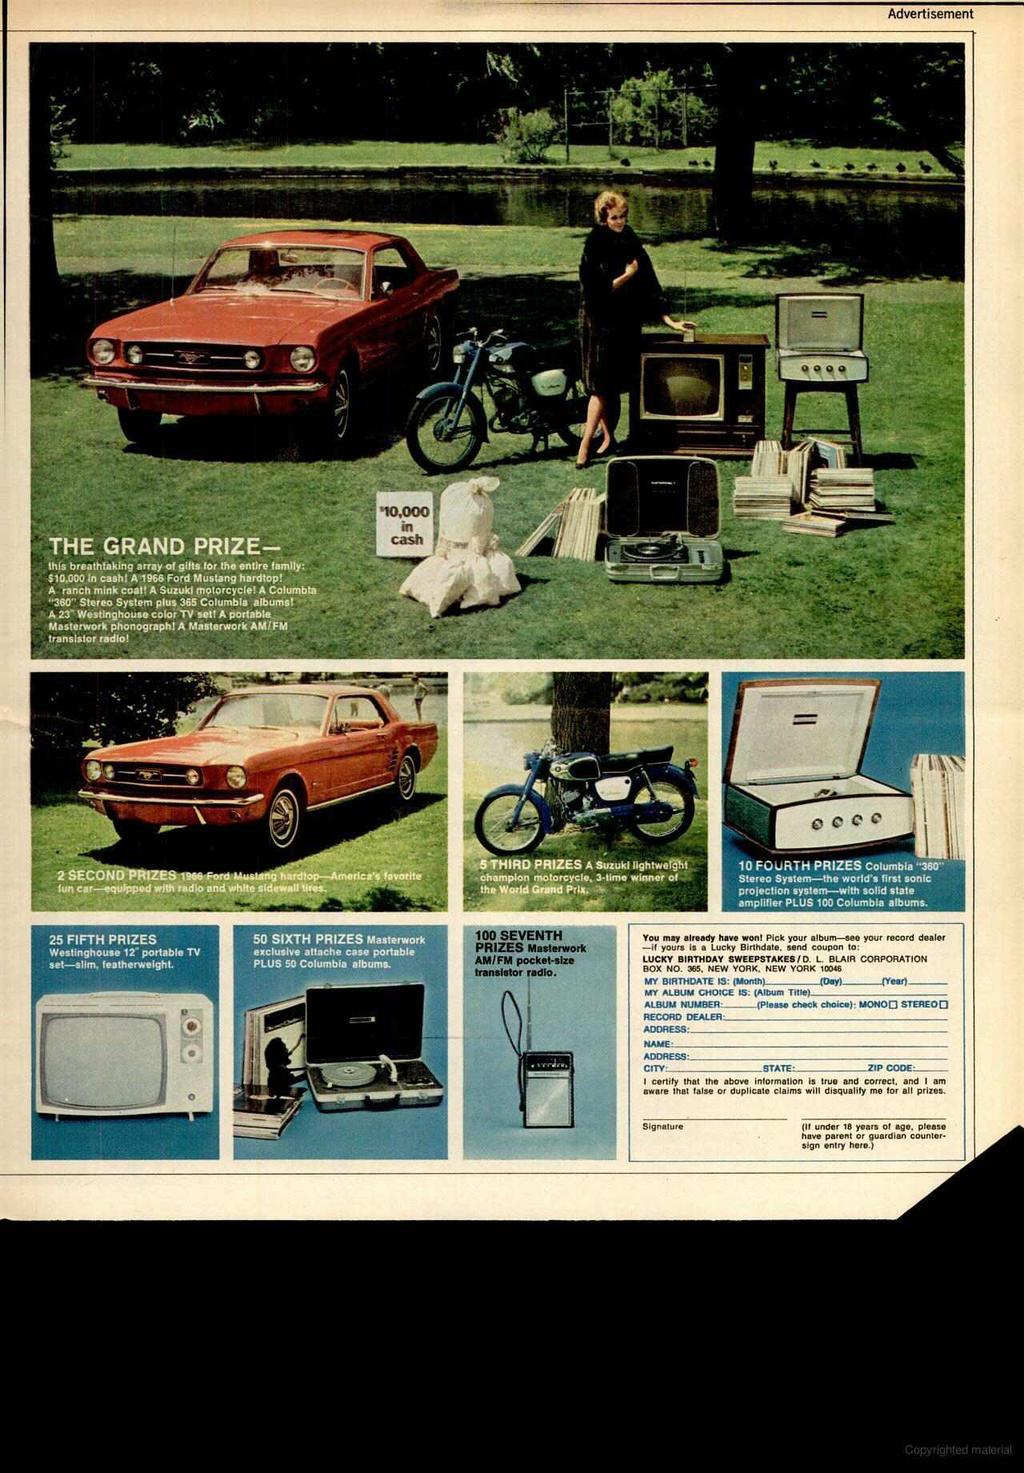 Advertisement THE GRAND PRIZE this breathtaking array of gifts for the entire family: 510.000 in cash! A 1966 Ford Mustang hardtop! A ranch mink coat! A Suzuki motorcycle!